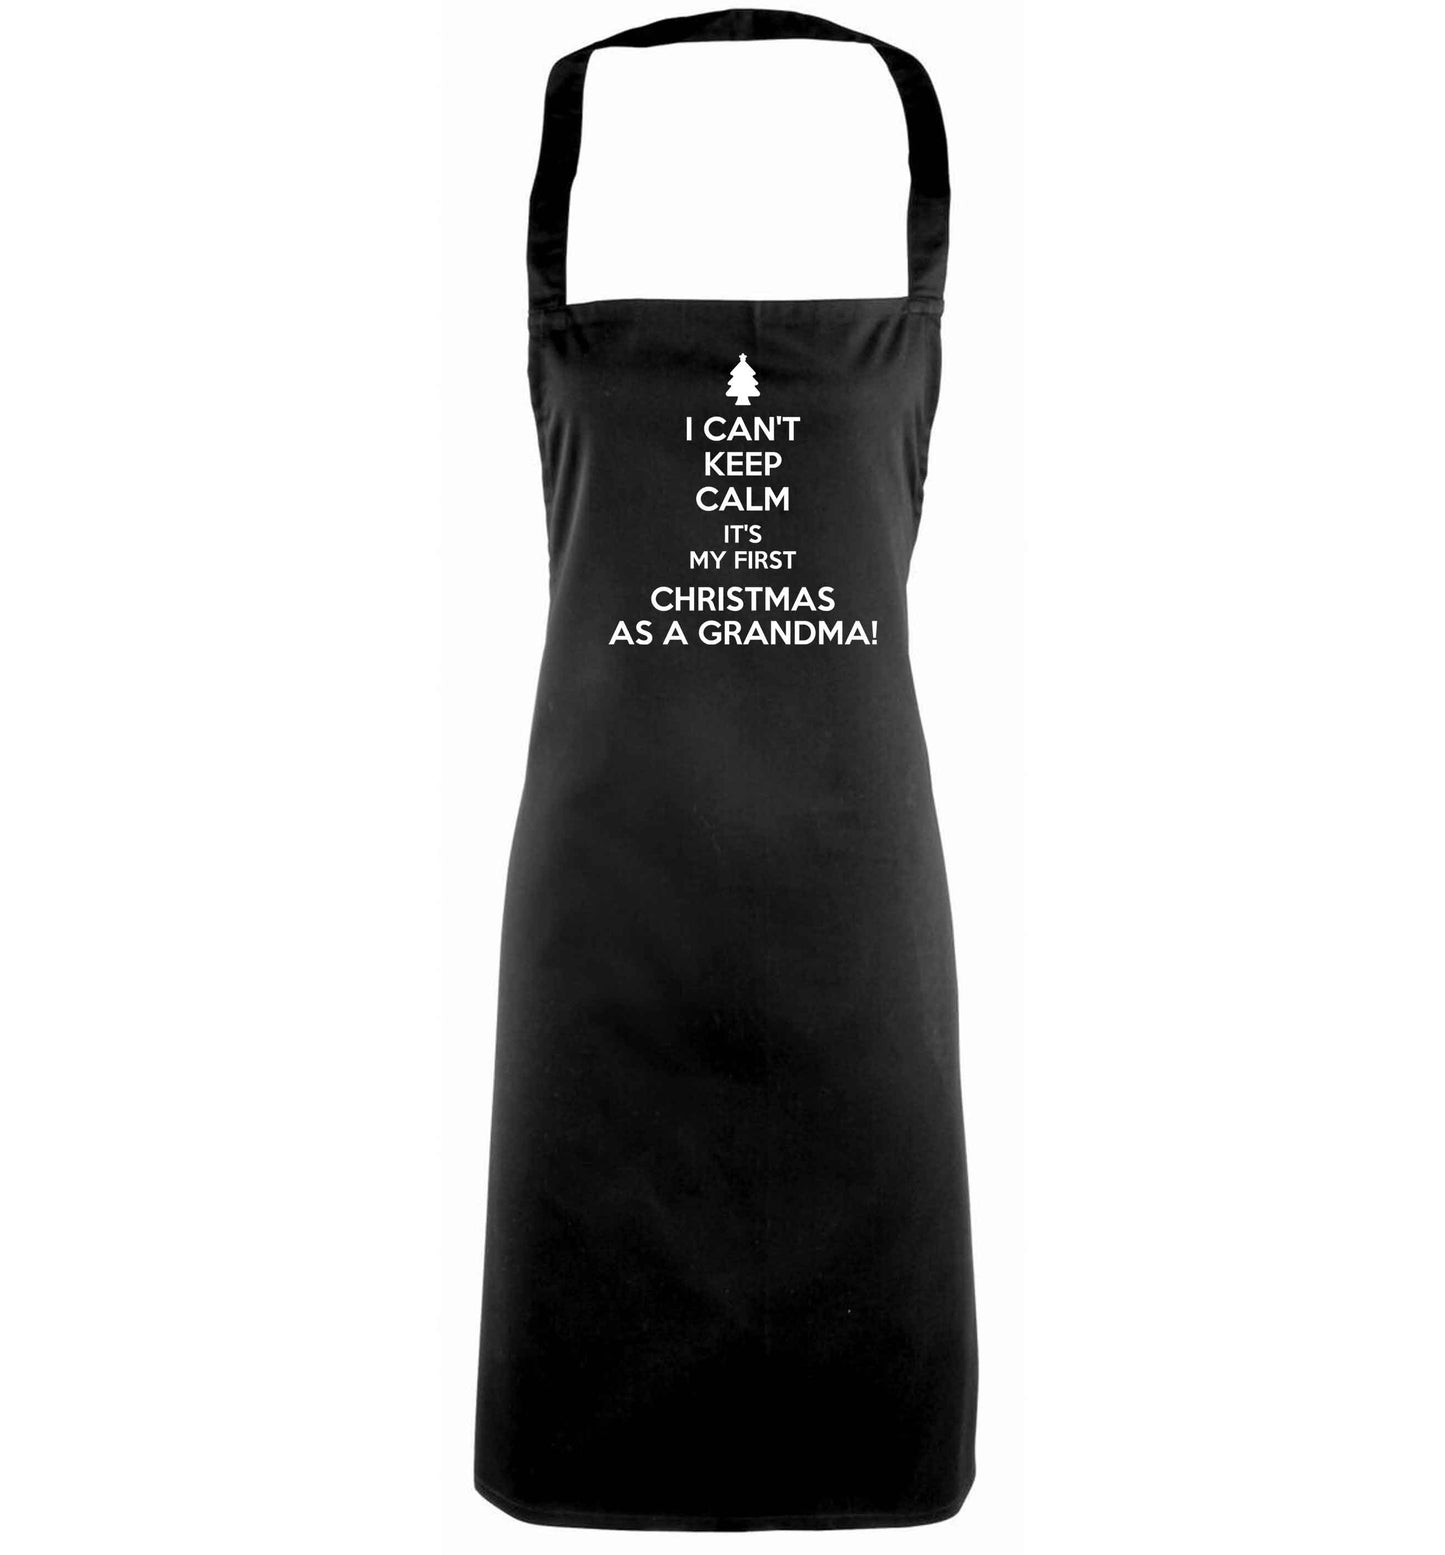 I can't keep calm it's my first Christmas as a grandma! black apron